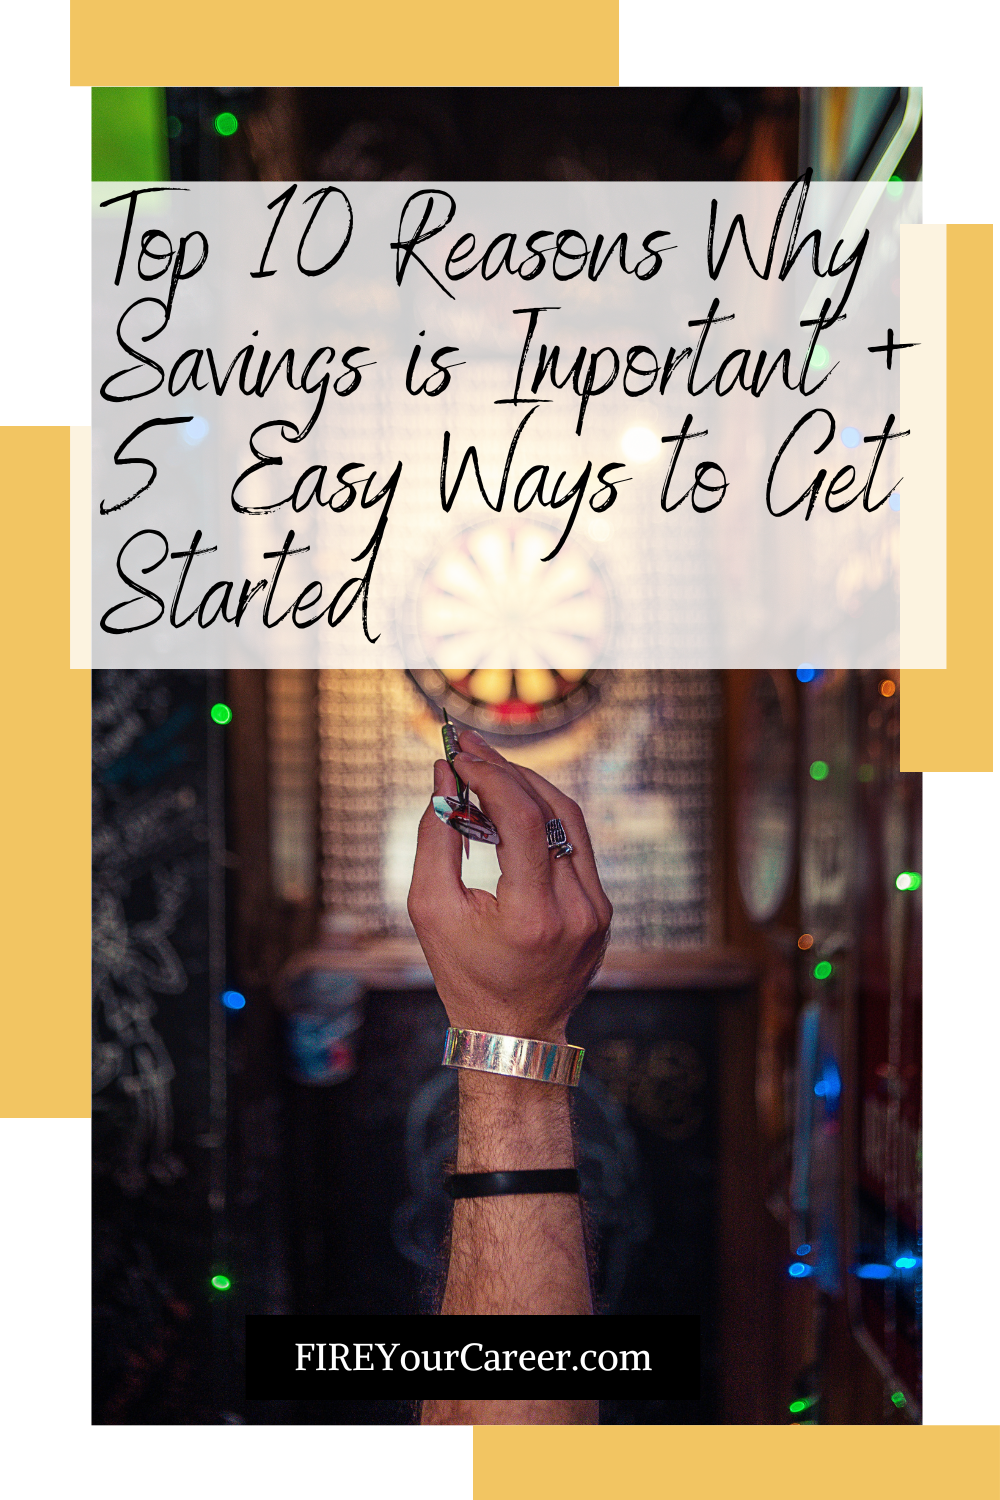 V2 Top 10 Reasons Why Savings is Important + 5 Easy Ways to Get Started Pinterest (1)